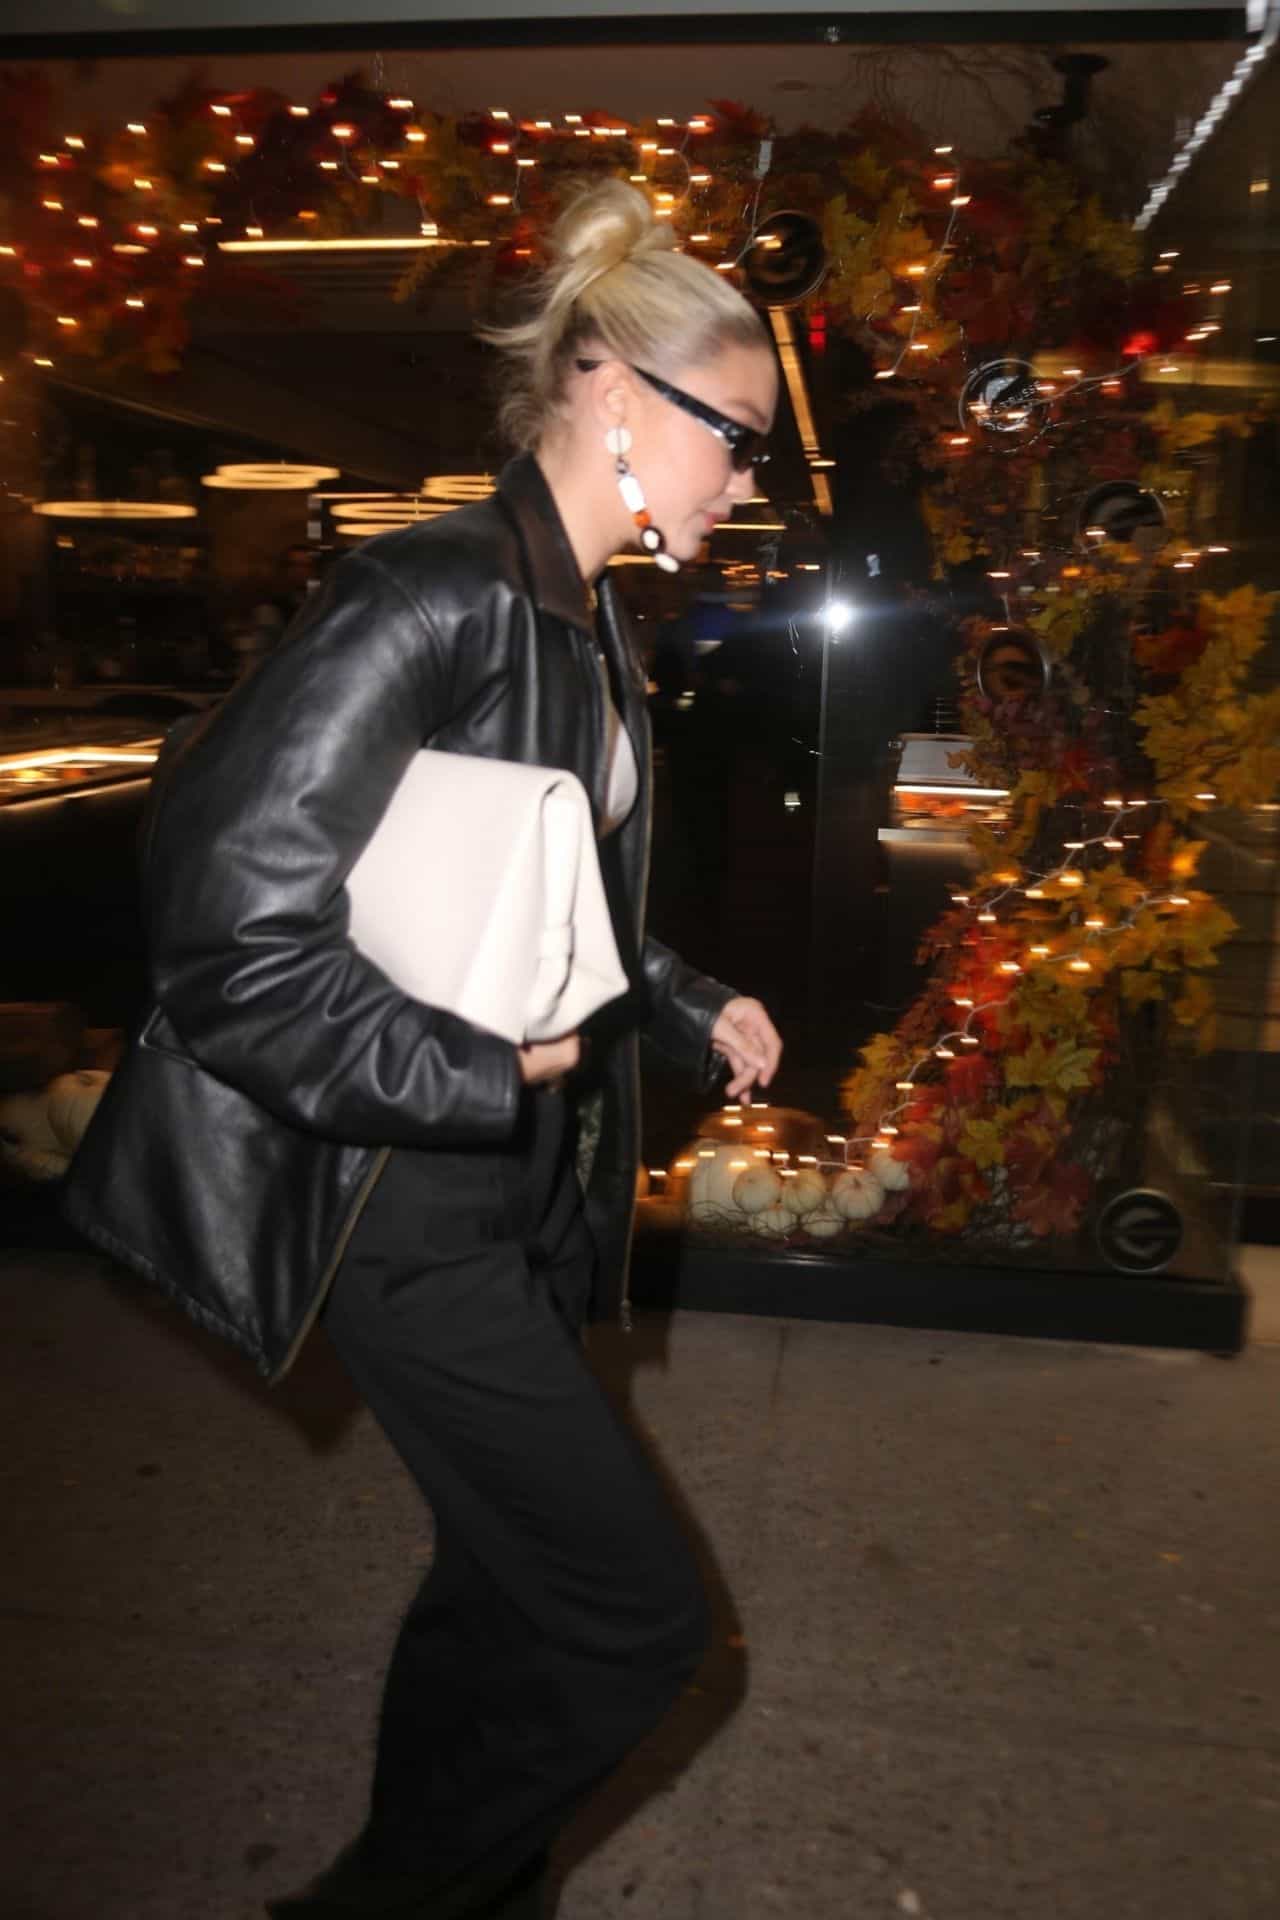 Gigi Hadid Looks Chic in All Black and White for Dinner at Caviar Russe